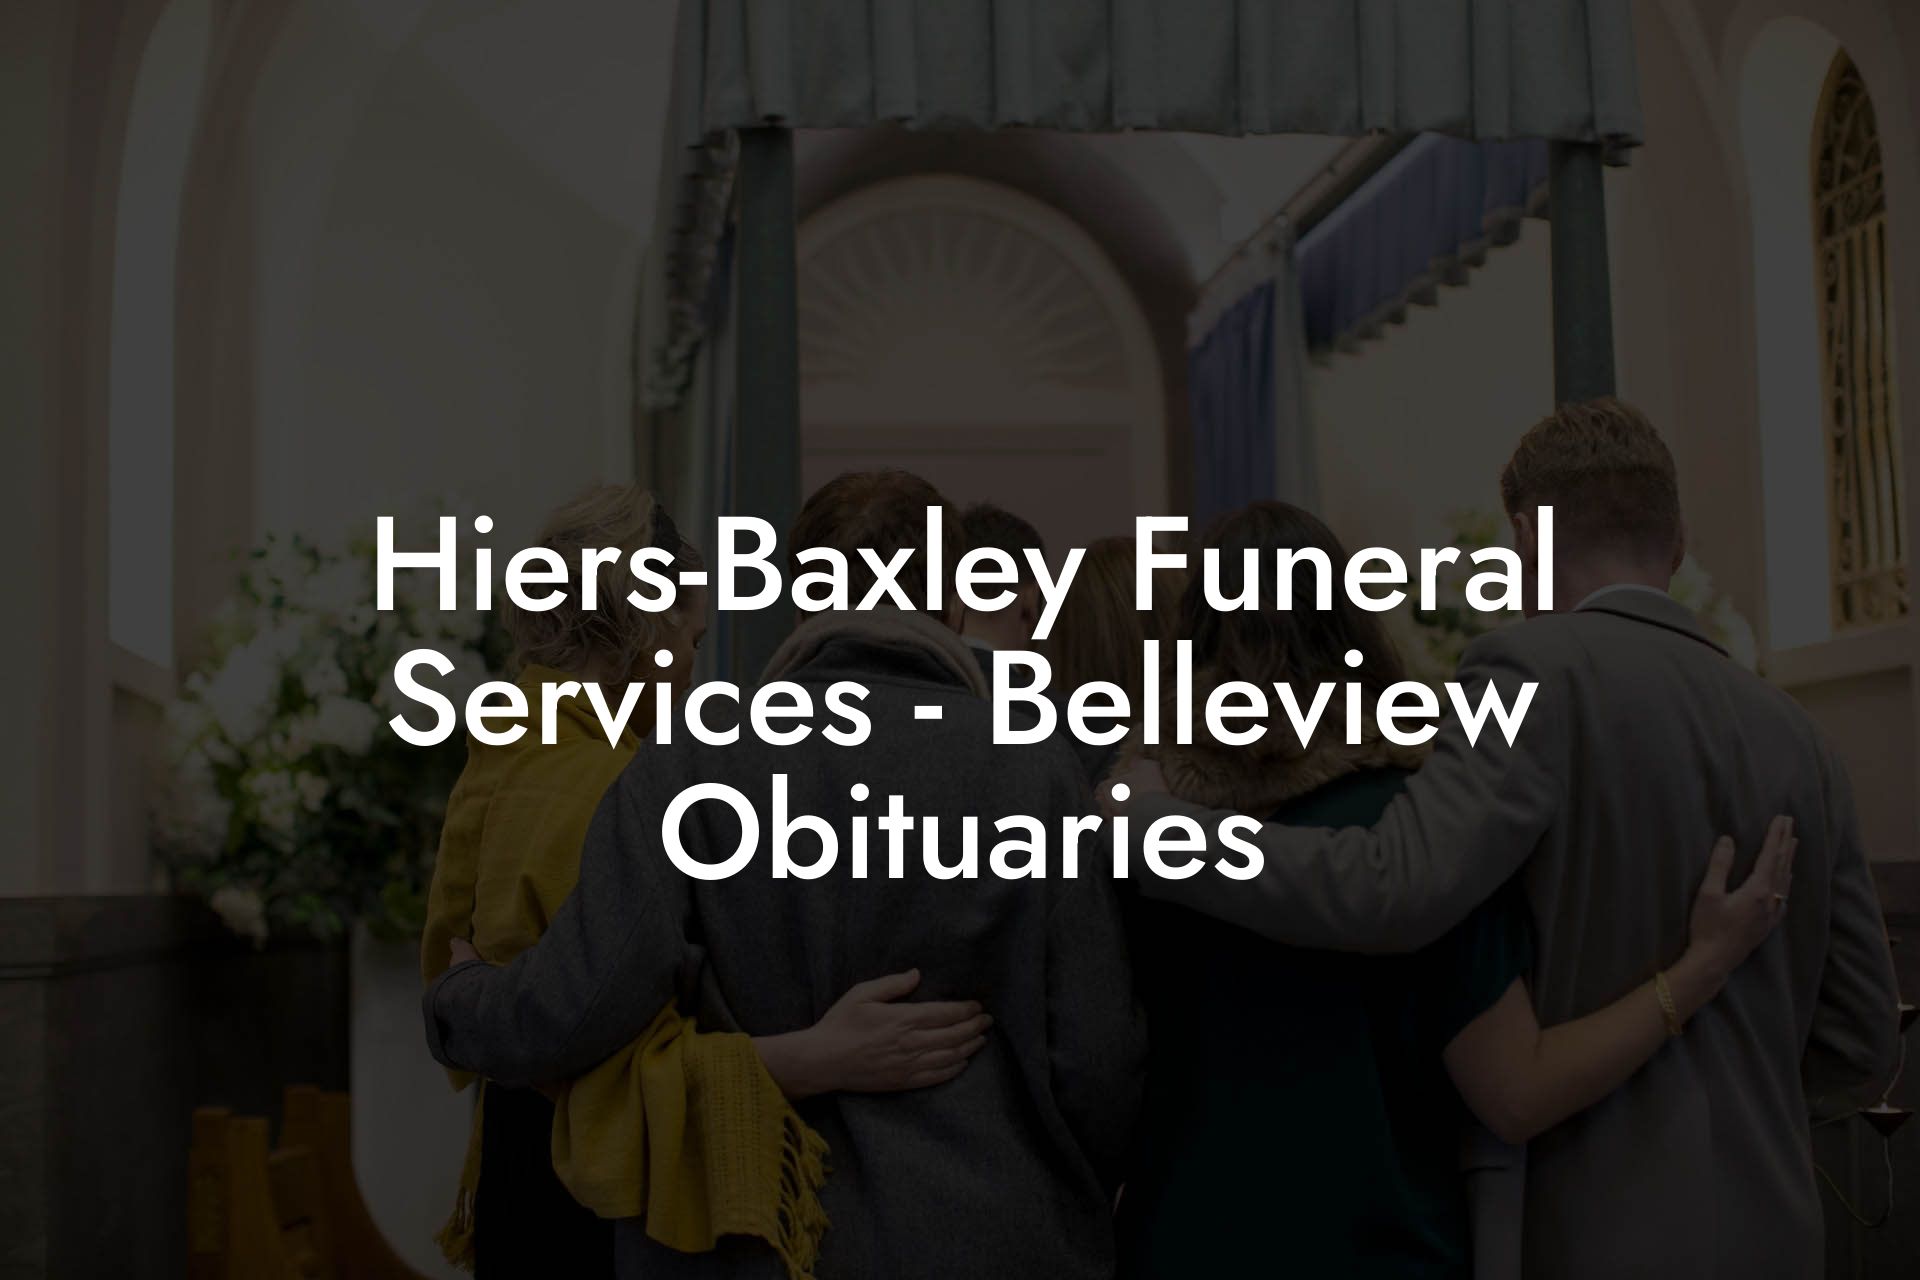 Hiers-Baxley Funeral Services - Belleview Obituaries